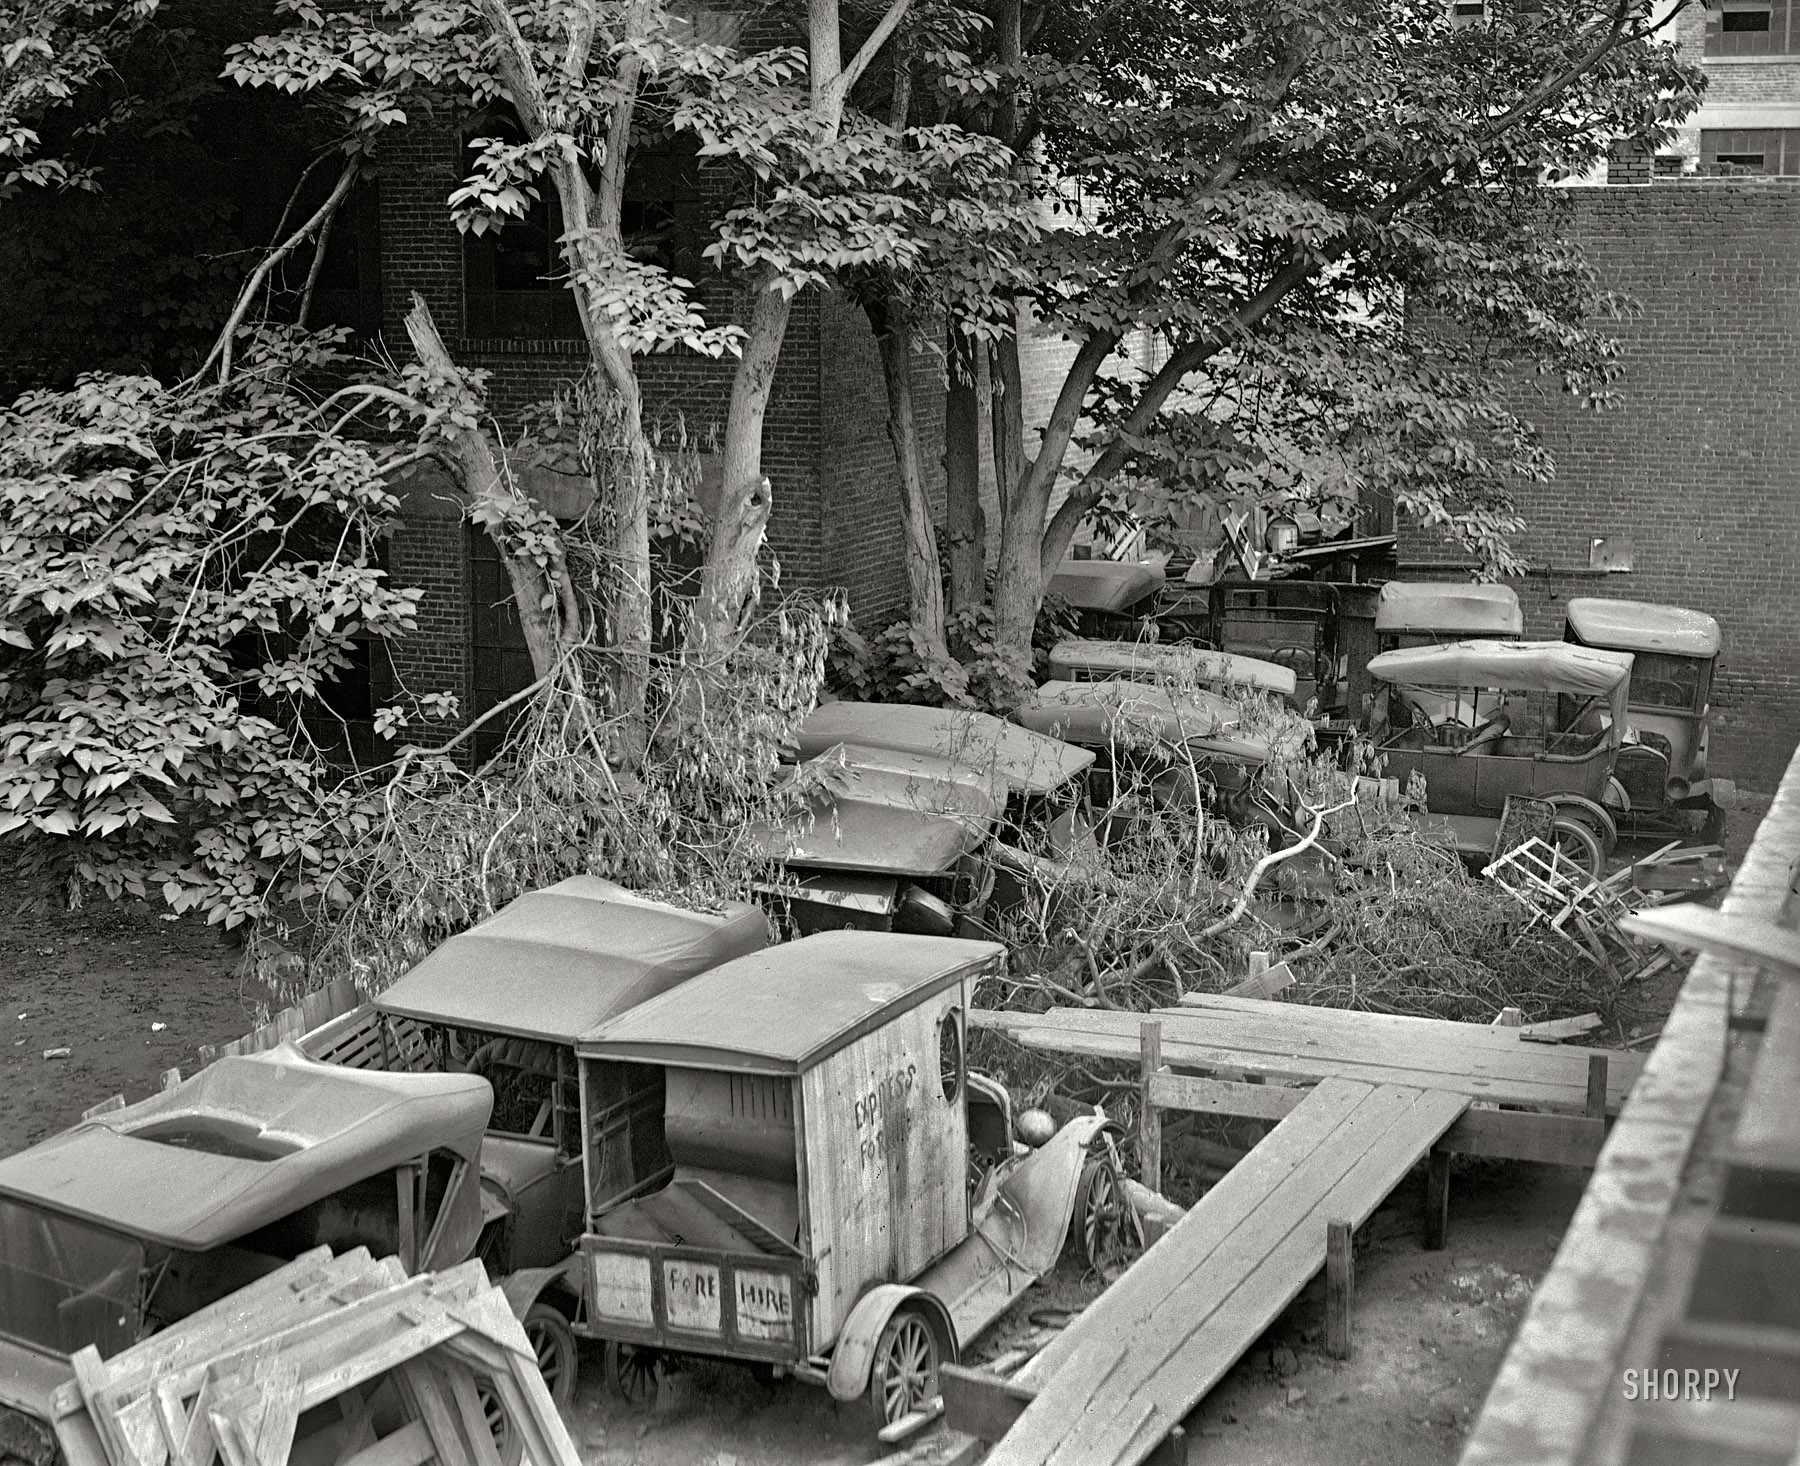 Circa 1926. Continuing our back-alley tour of Washington, D.C. "Ford Motor Co." An urban junkyard. National Photo Company glass negative. View full size.